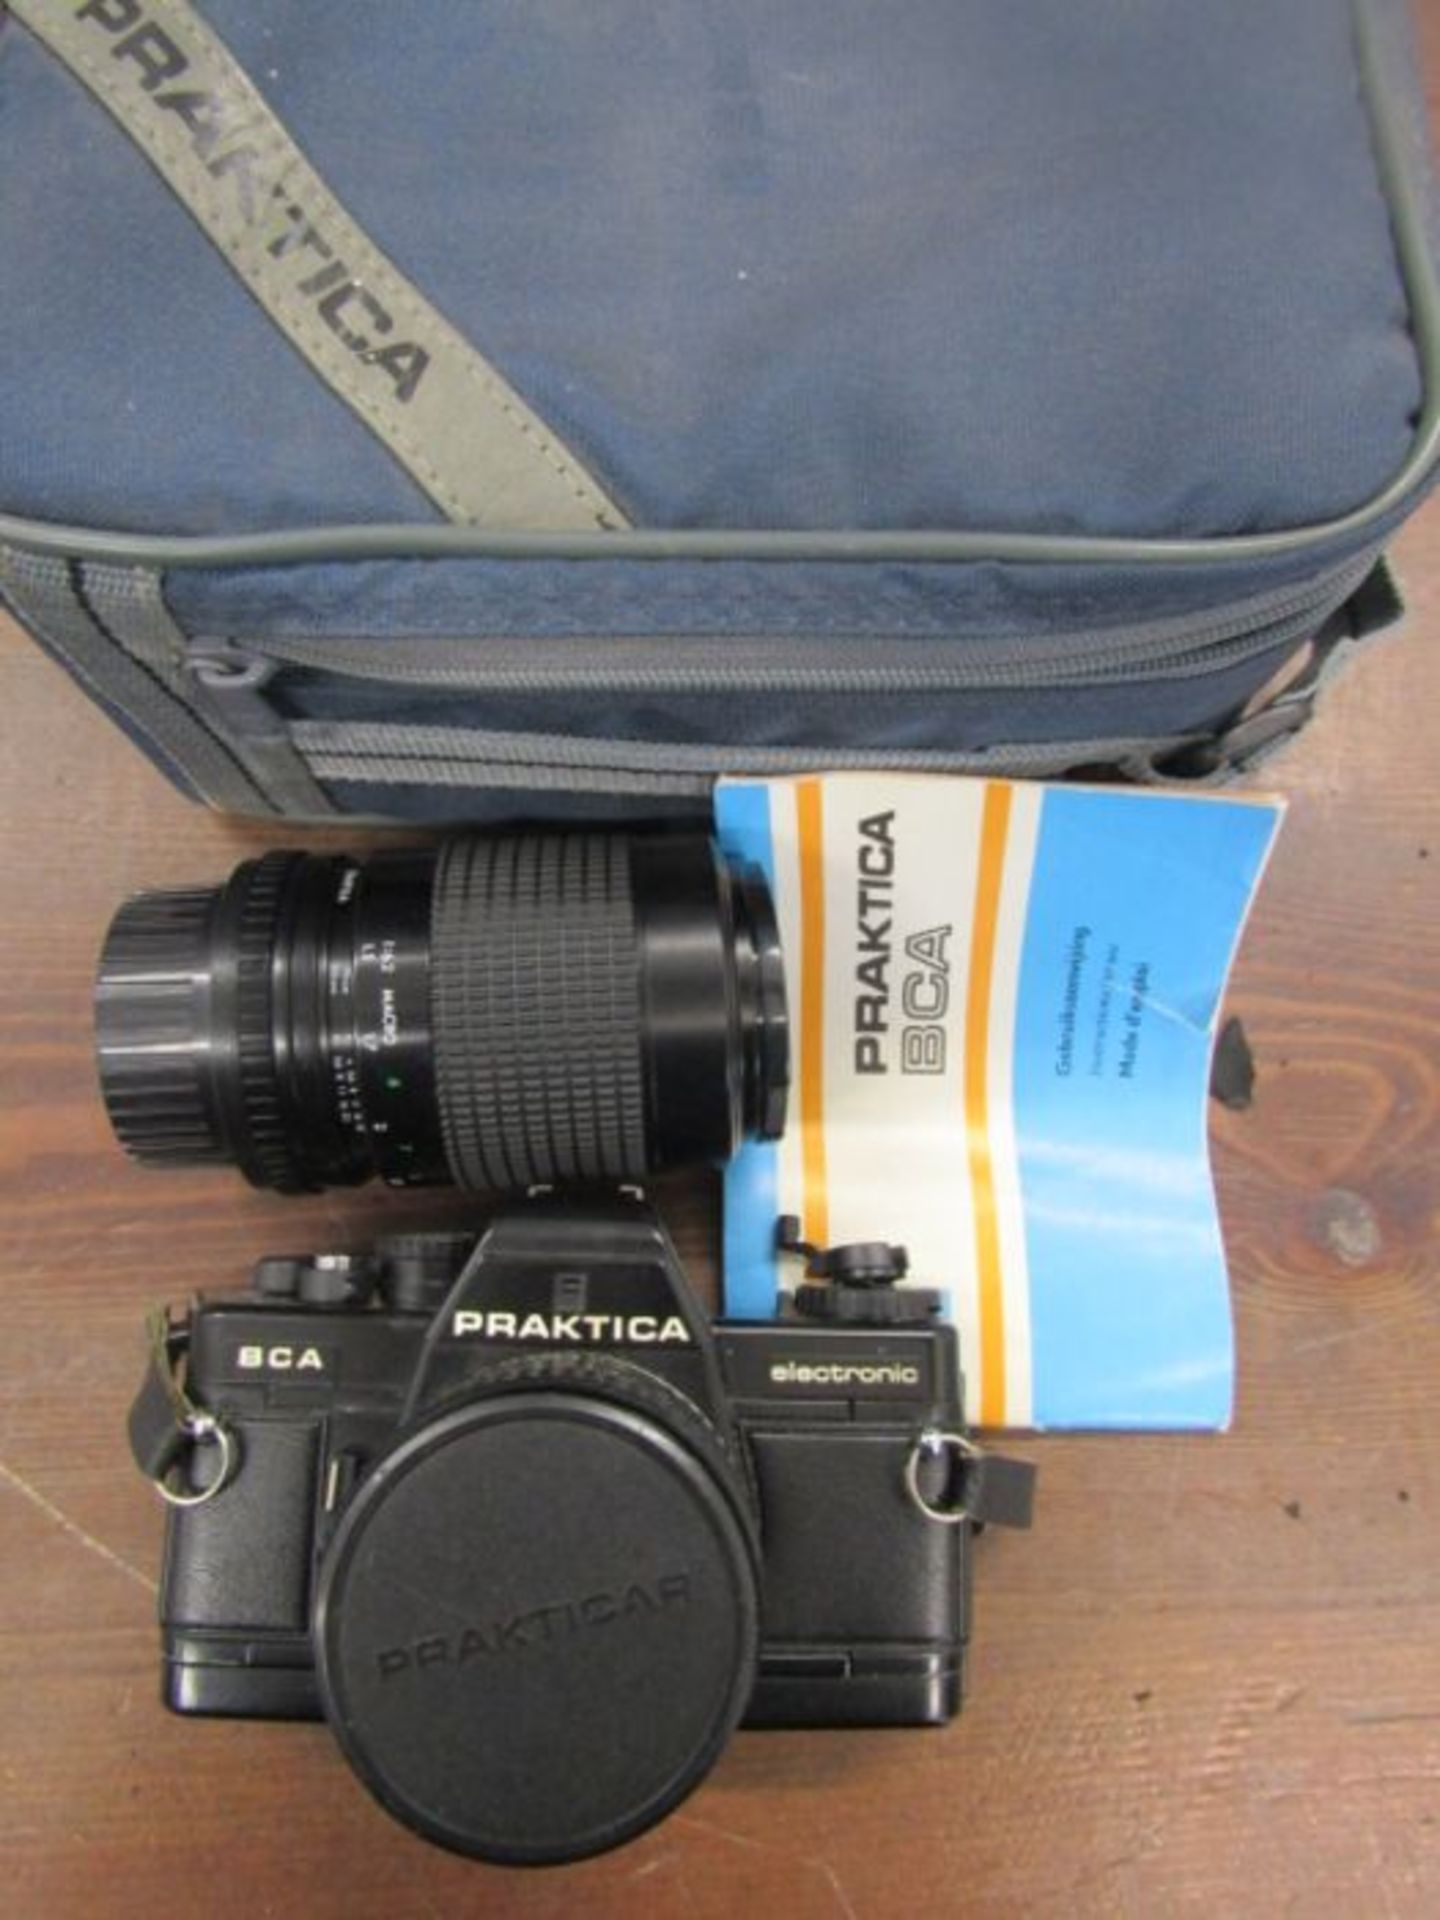 Praktica 35mm BCA camera in carry case with 70-210mm telephoto lens and carry strap